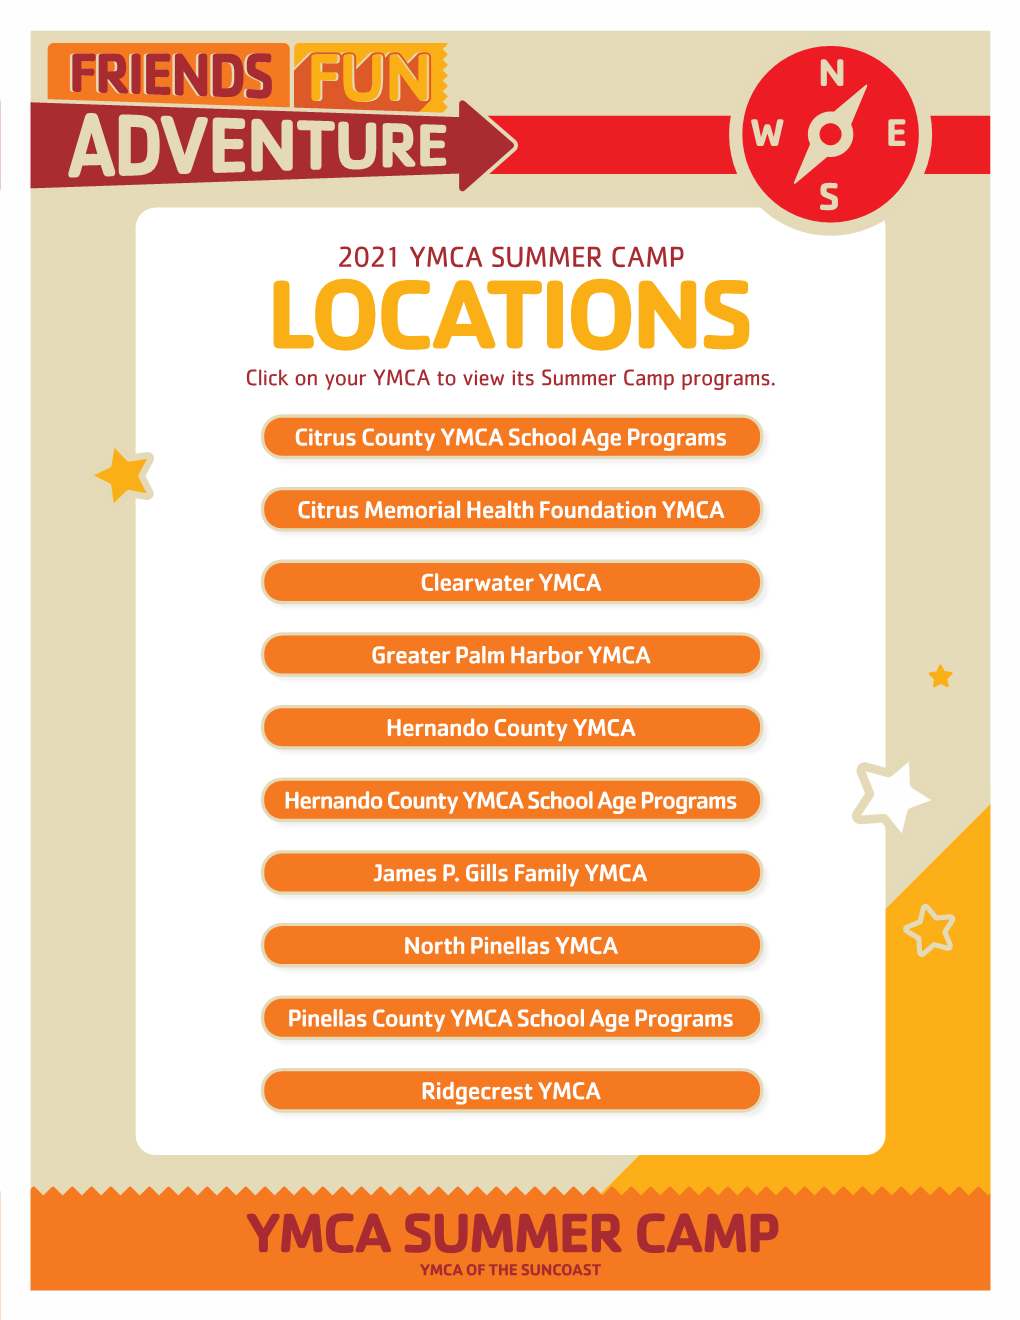 2021 YMCA SUMMER CAMP LOCATIONS Click on Your YMCA to View Its Summer Camp Programs